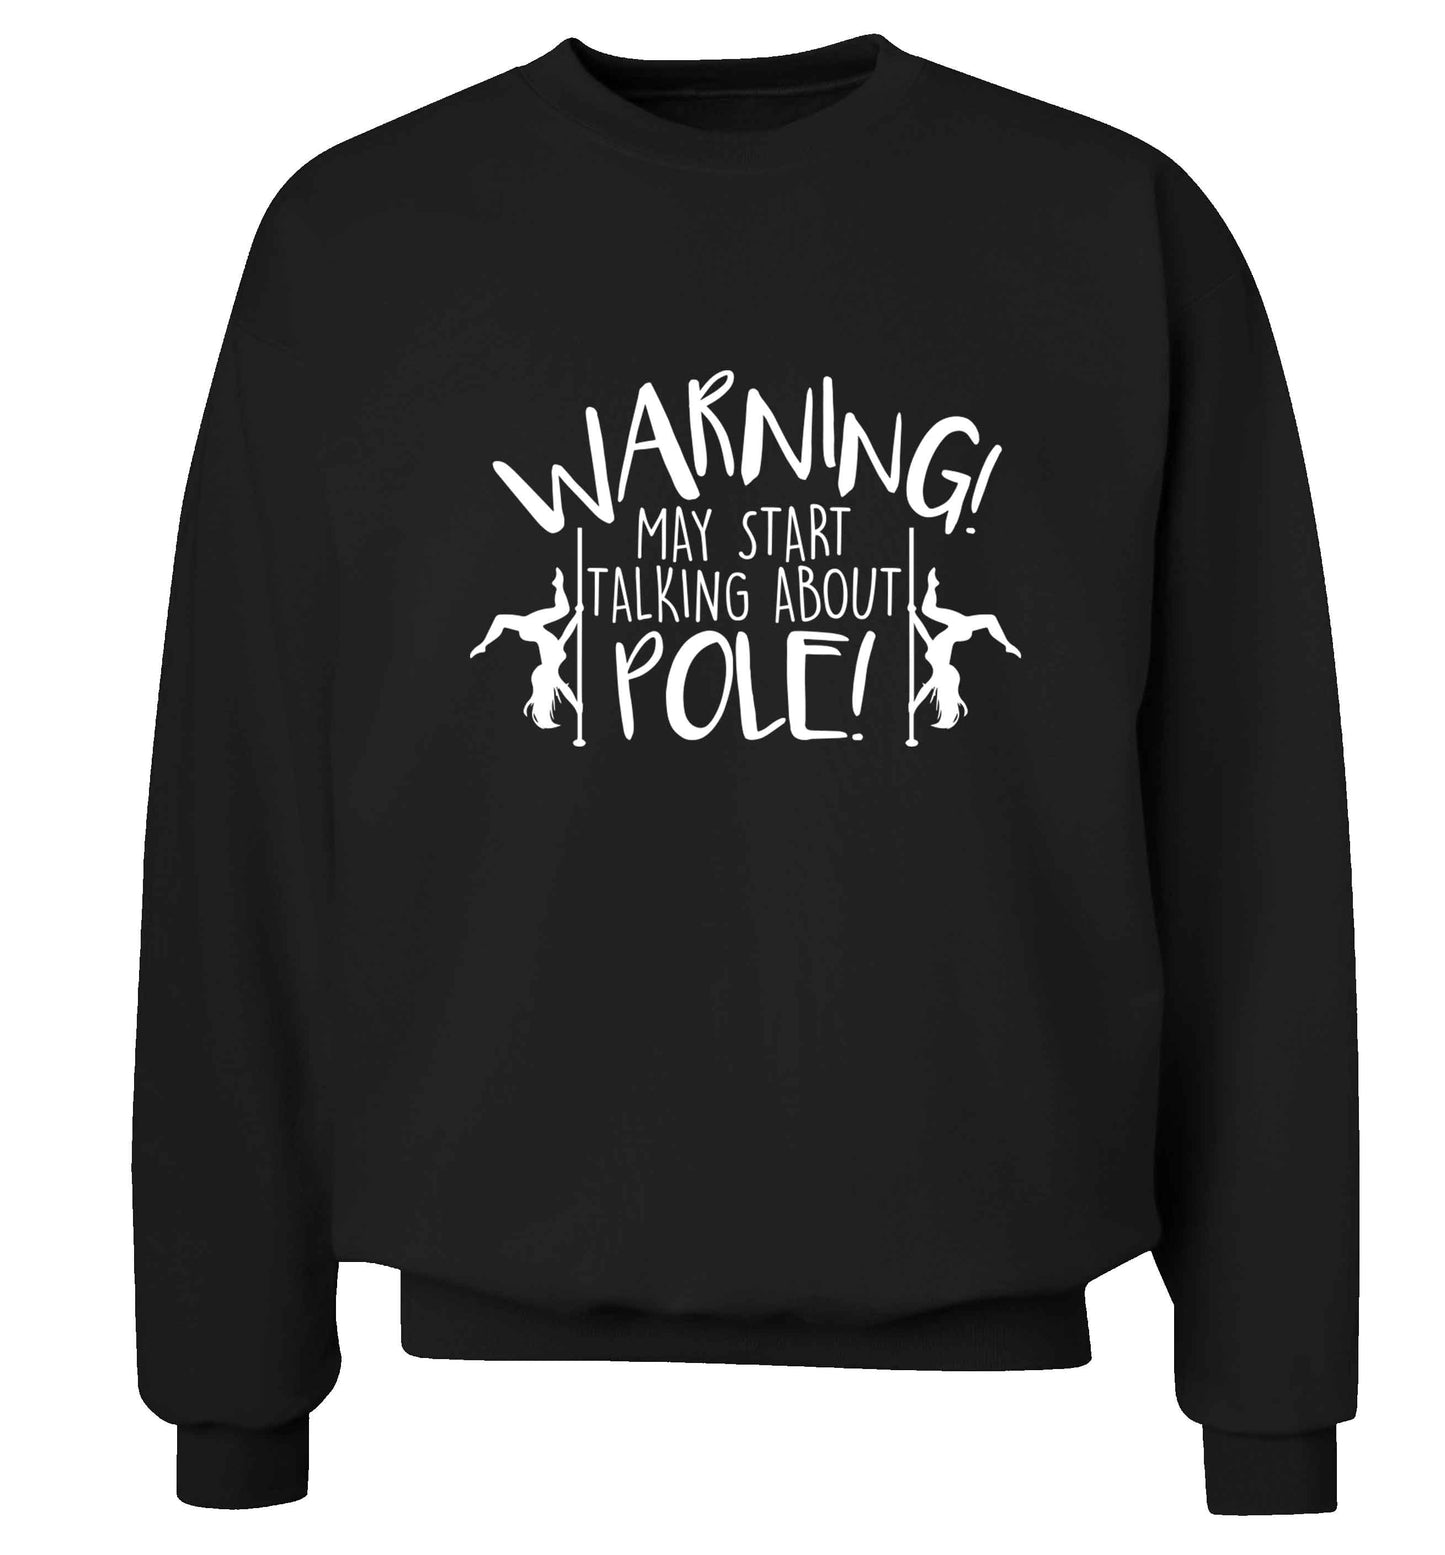 Warning may start talking about pole  adult's unisex black sweater 2XL